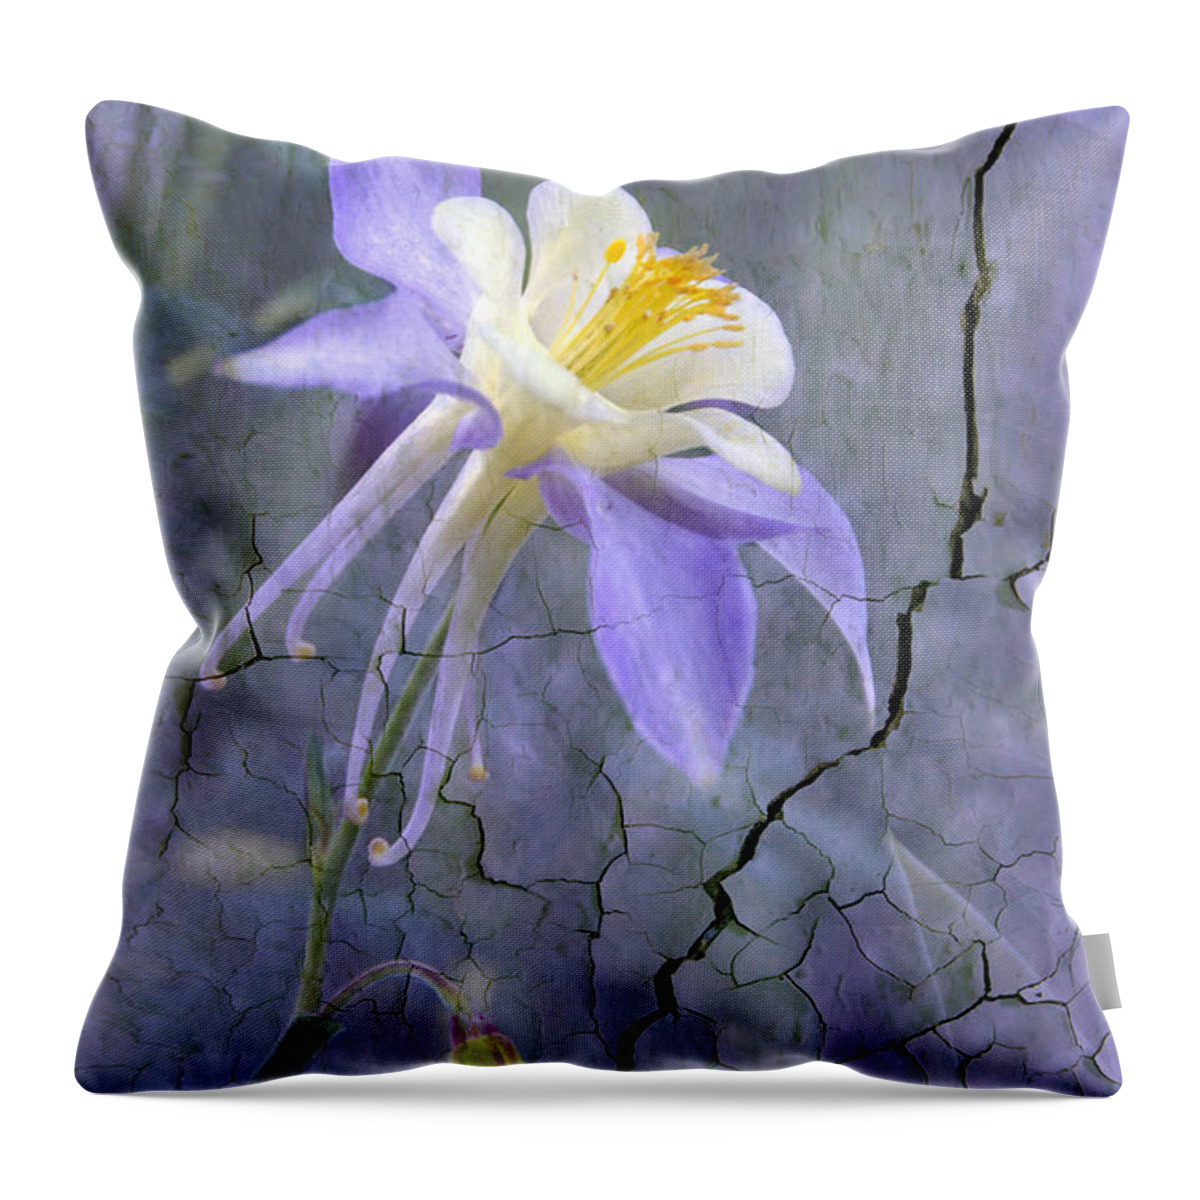 Wall Photography. Throw Pillow featuring the photograph Columbine on Cracked wall by James Steele